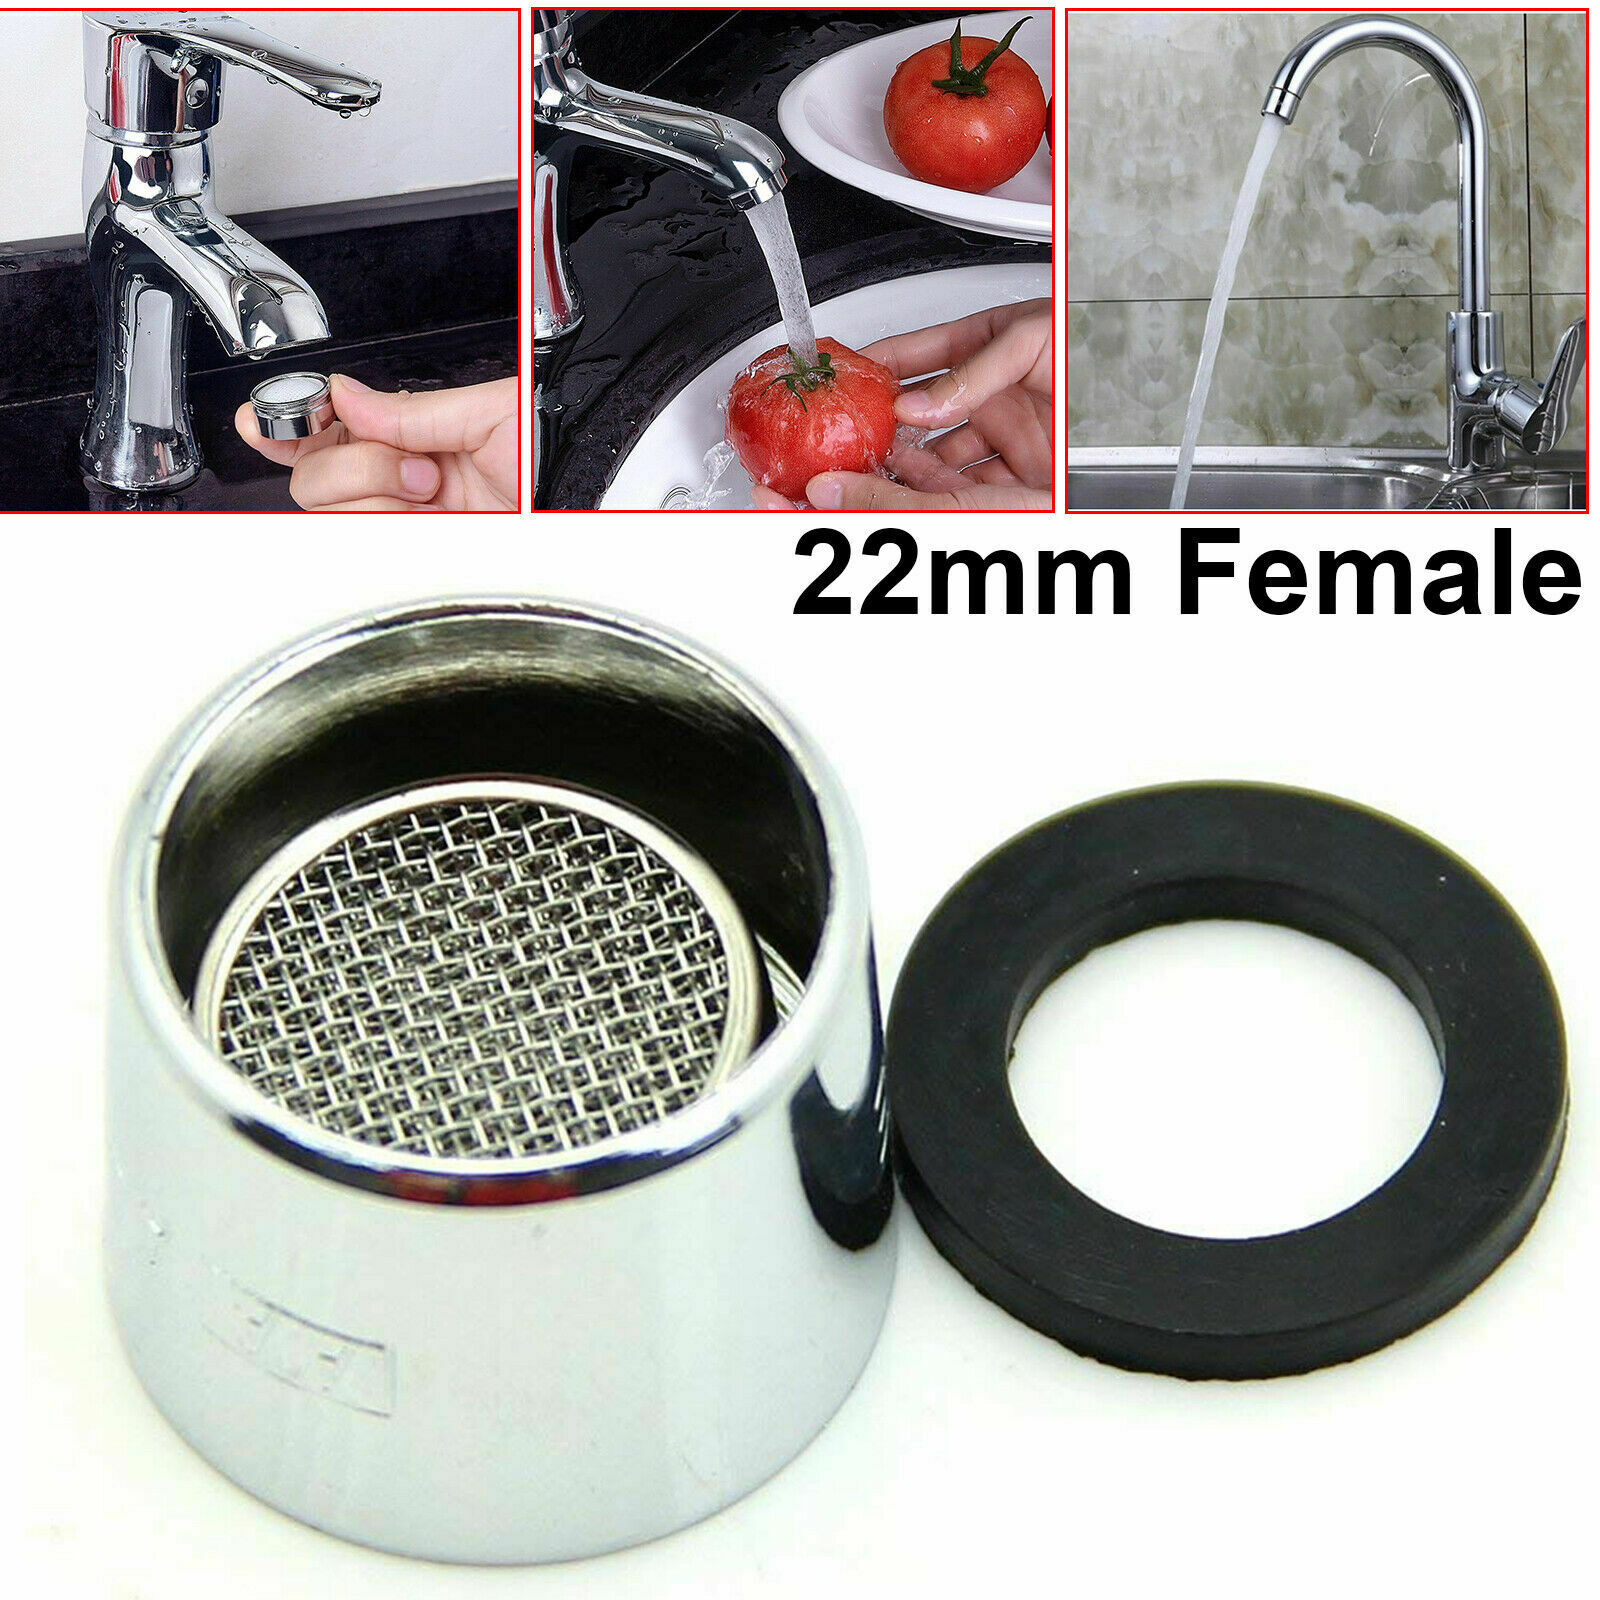 22Mm Female Tap Aerator Water Saving Faucet Nozzle Spout End Diffuser Filter